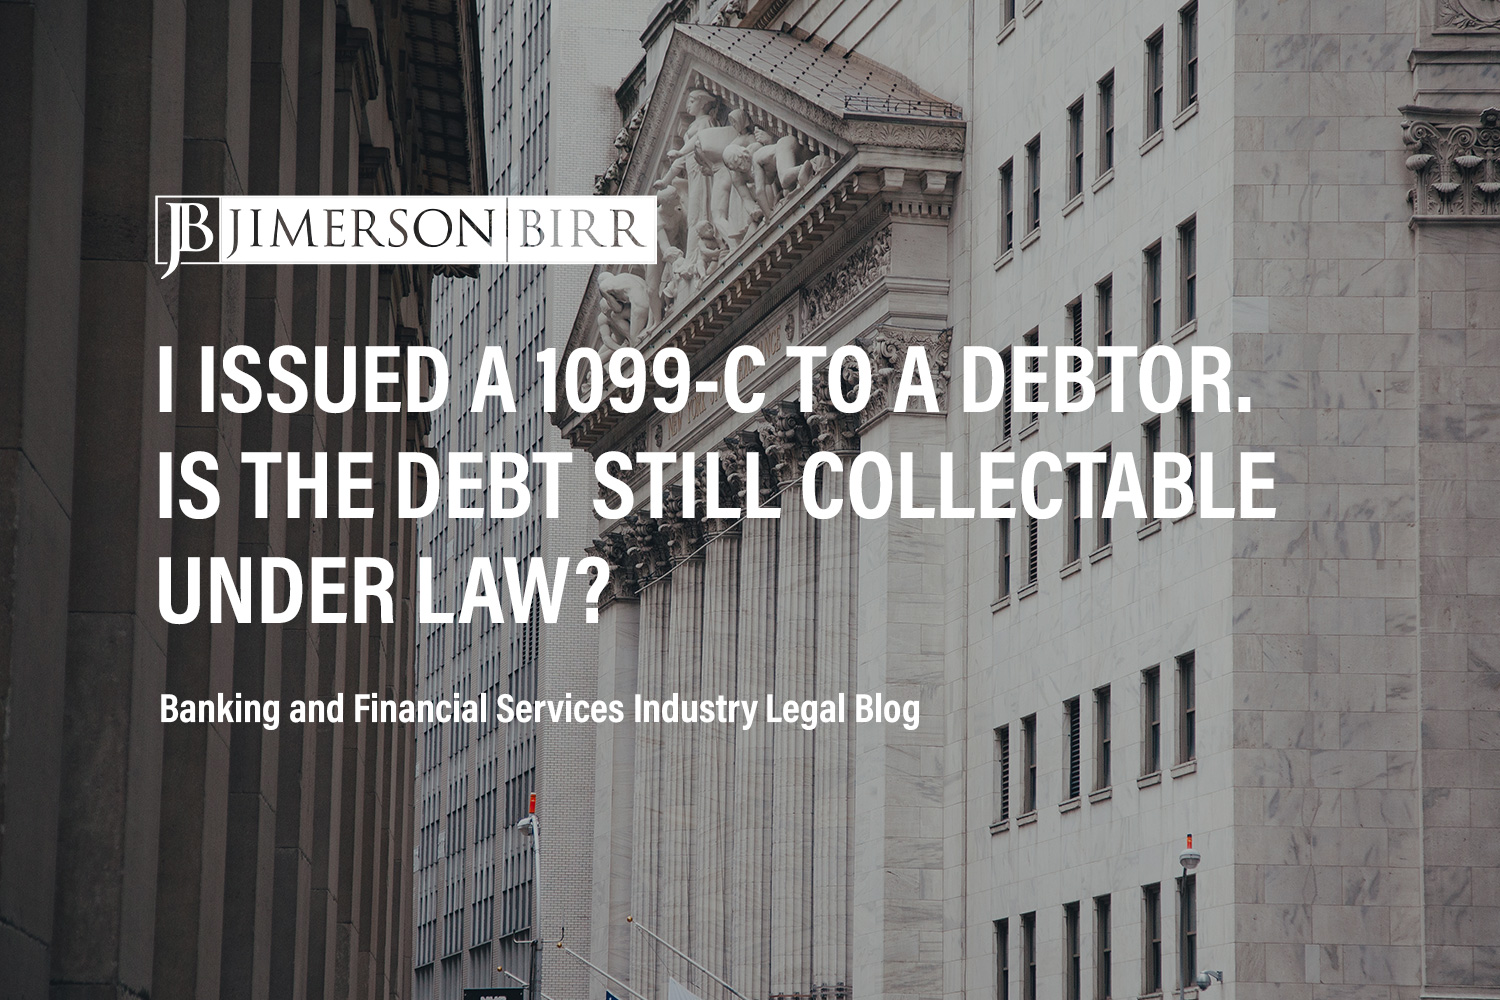 Can a Lender Pursue Debt Collection After a Charge Off and 1099-C Issuance?